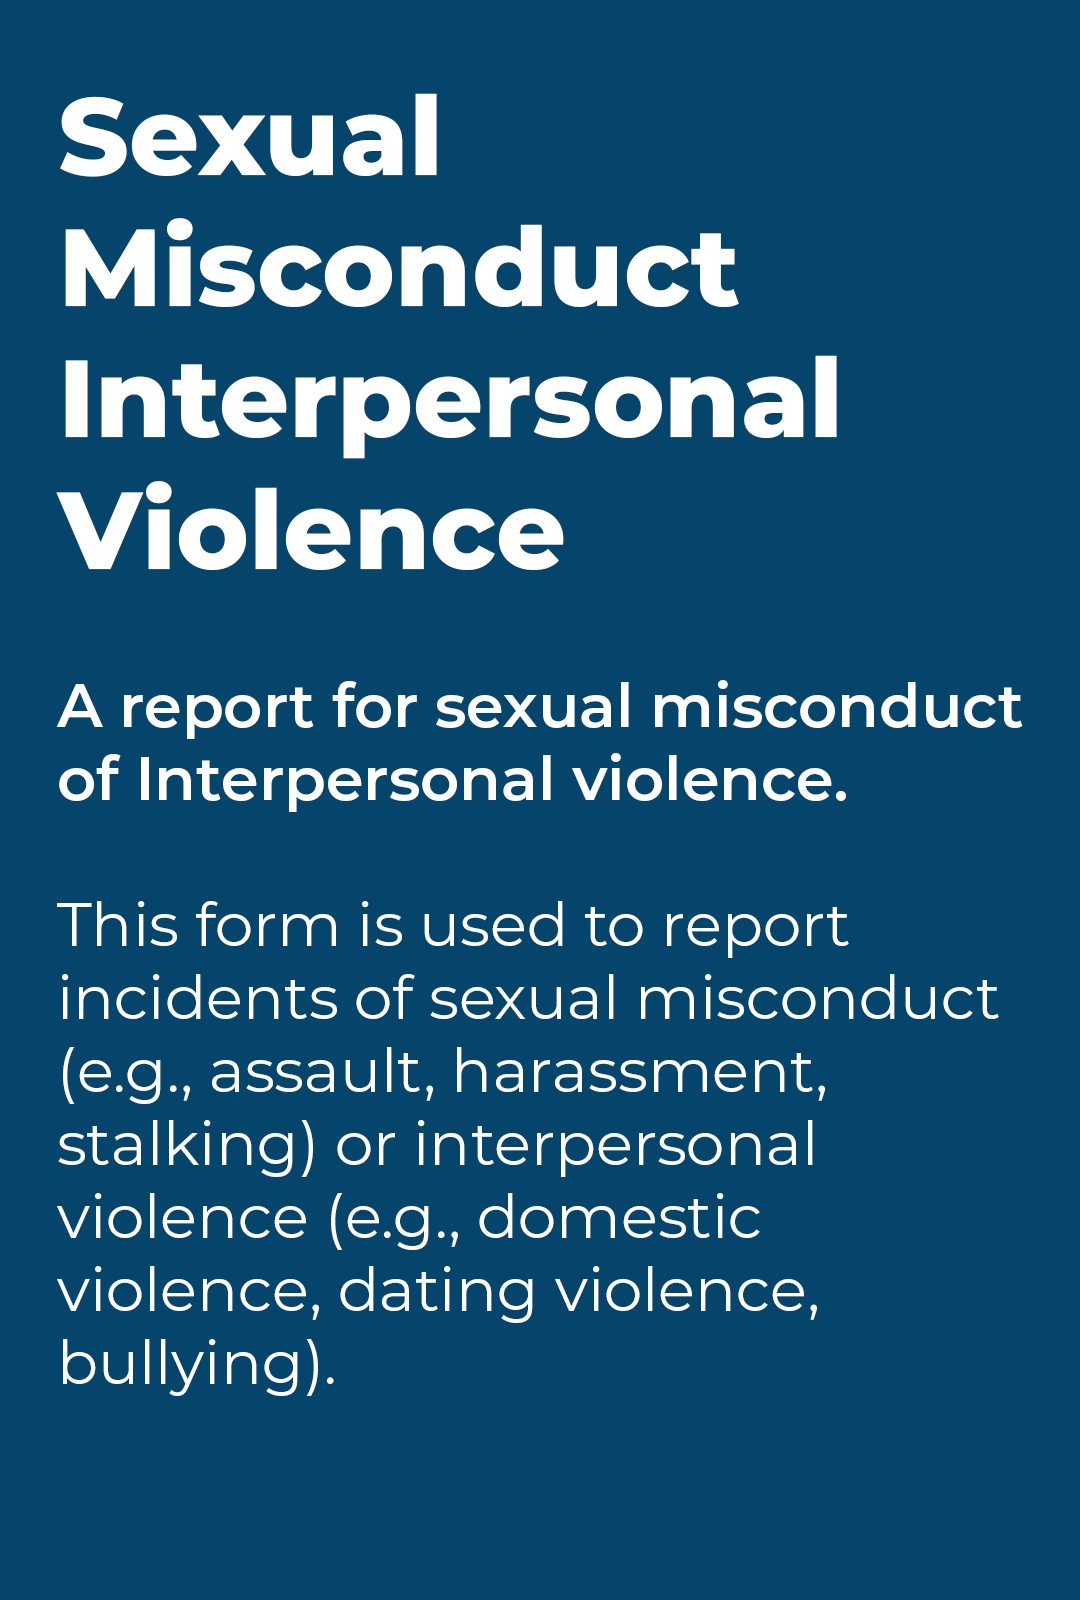 Link to Sexual Misconduct/Interpersonal Violence Form